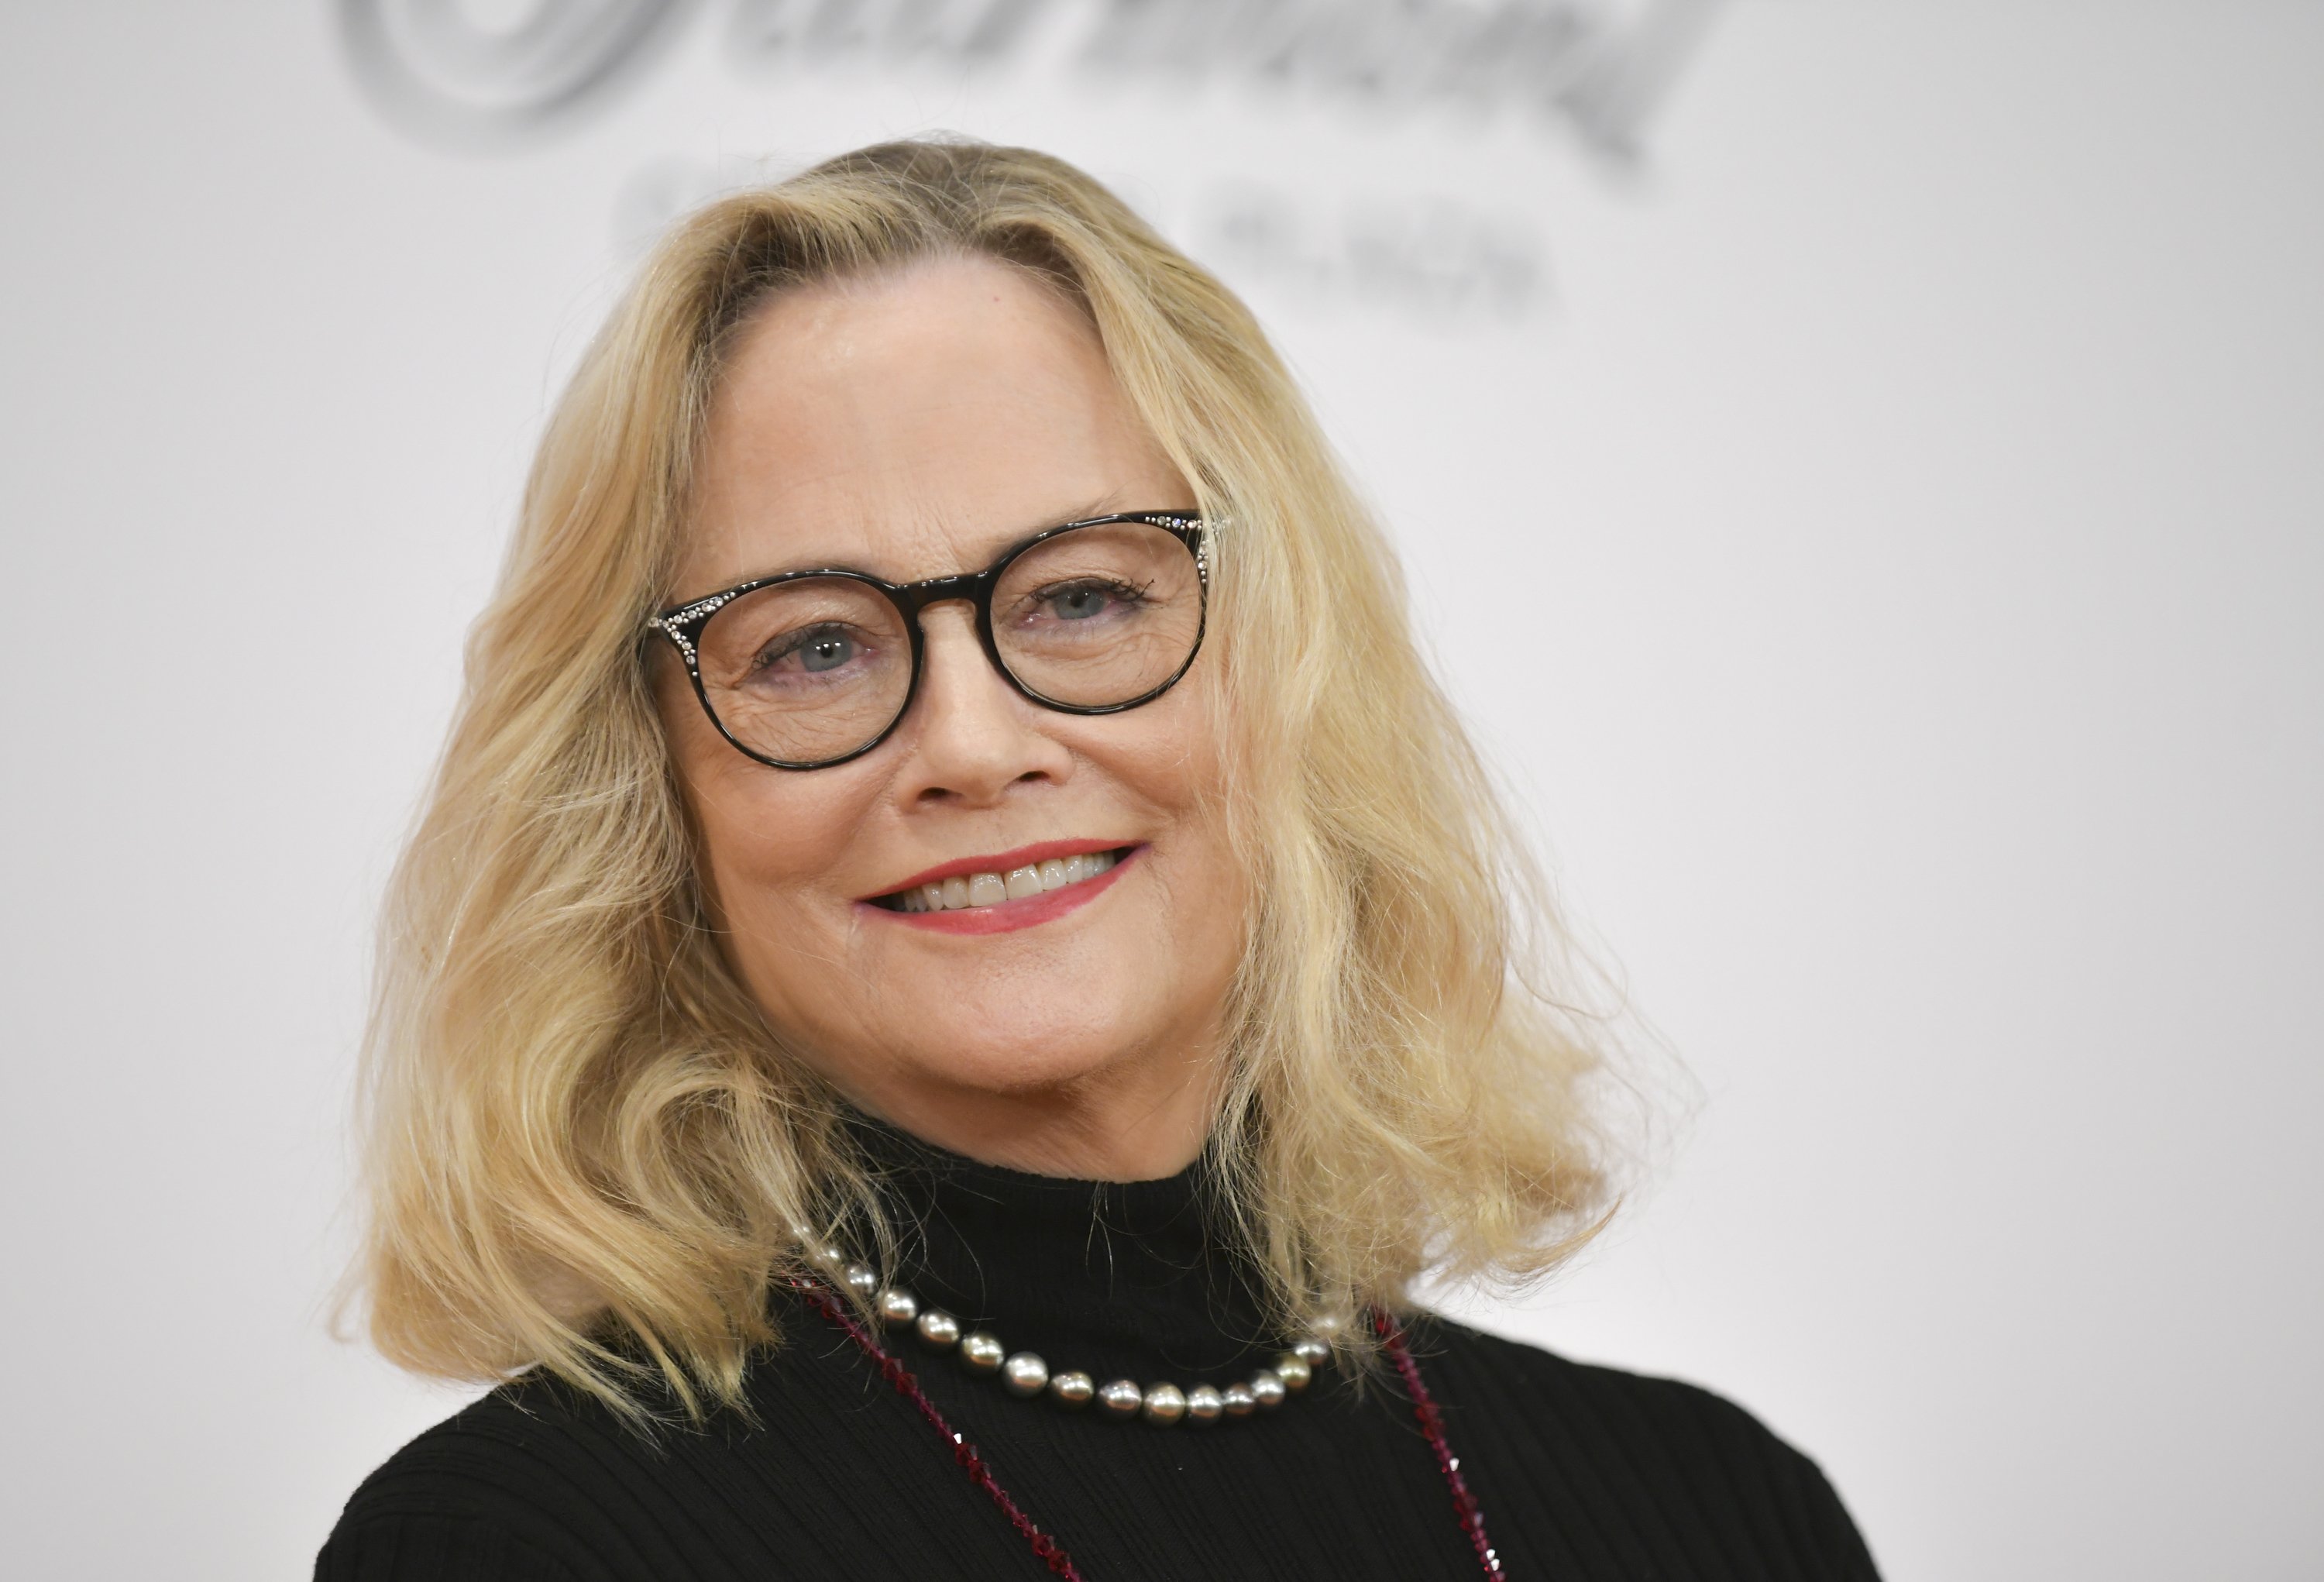 Cybill Shepherd at the 29th annual Race to Erase MS Gala on May 20, 2022, in Los Angeles, California | Source: Getty Images